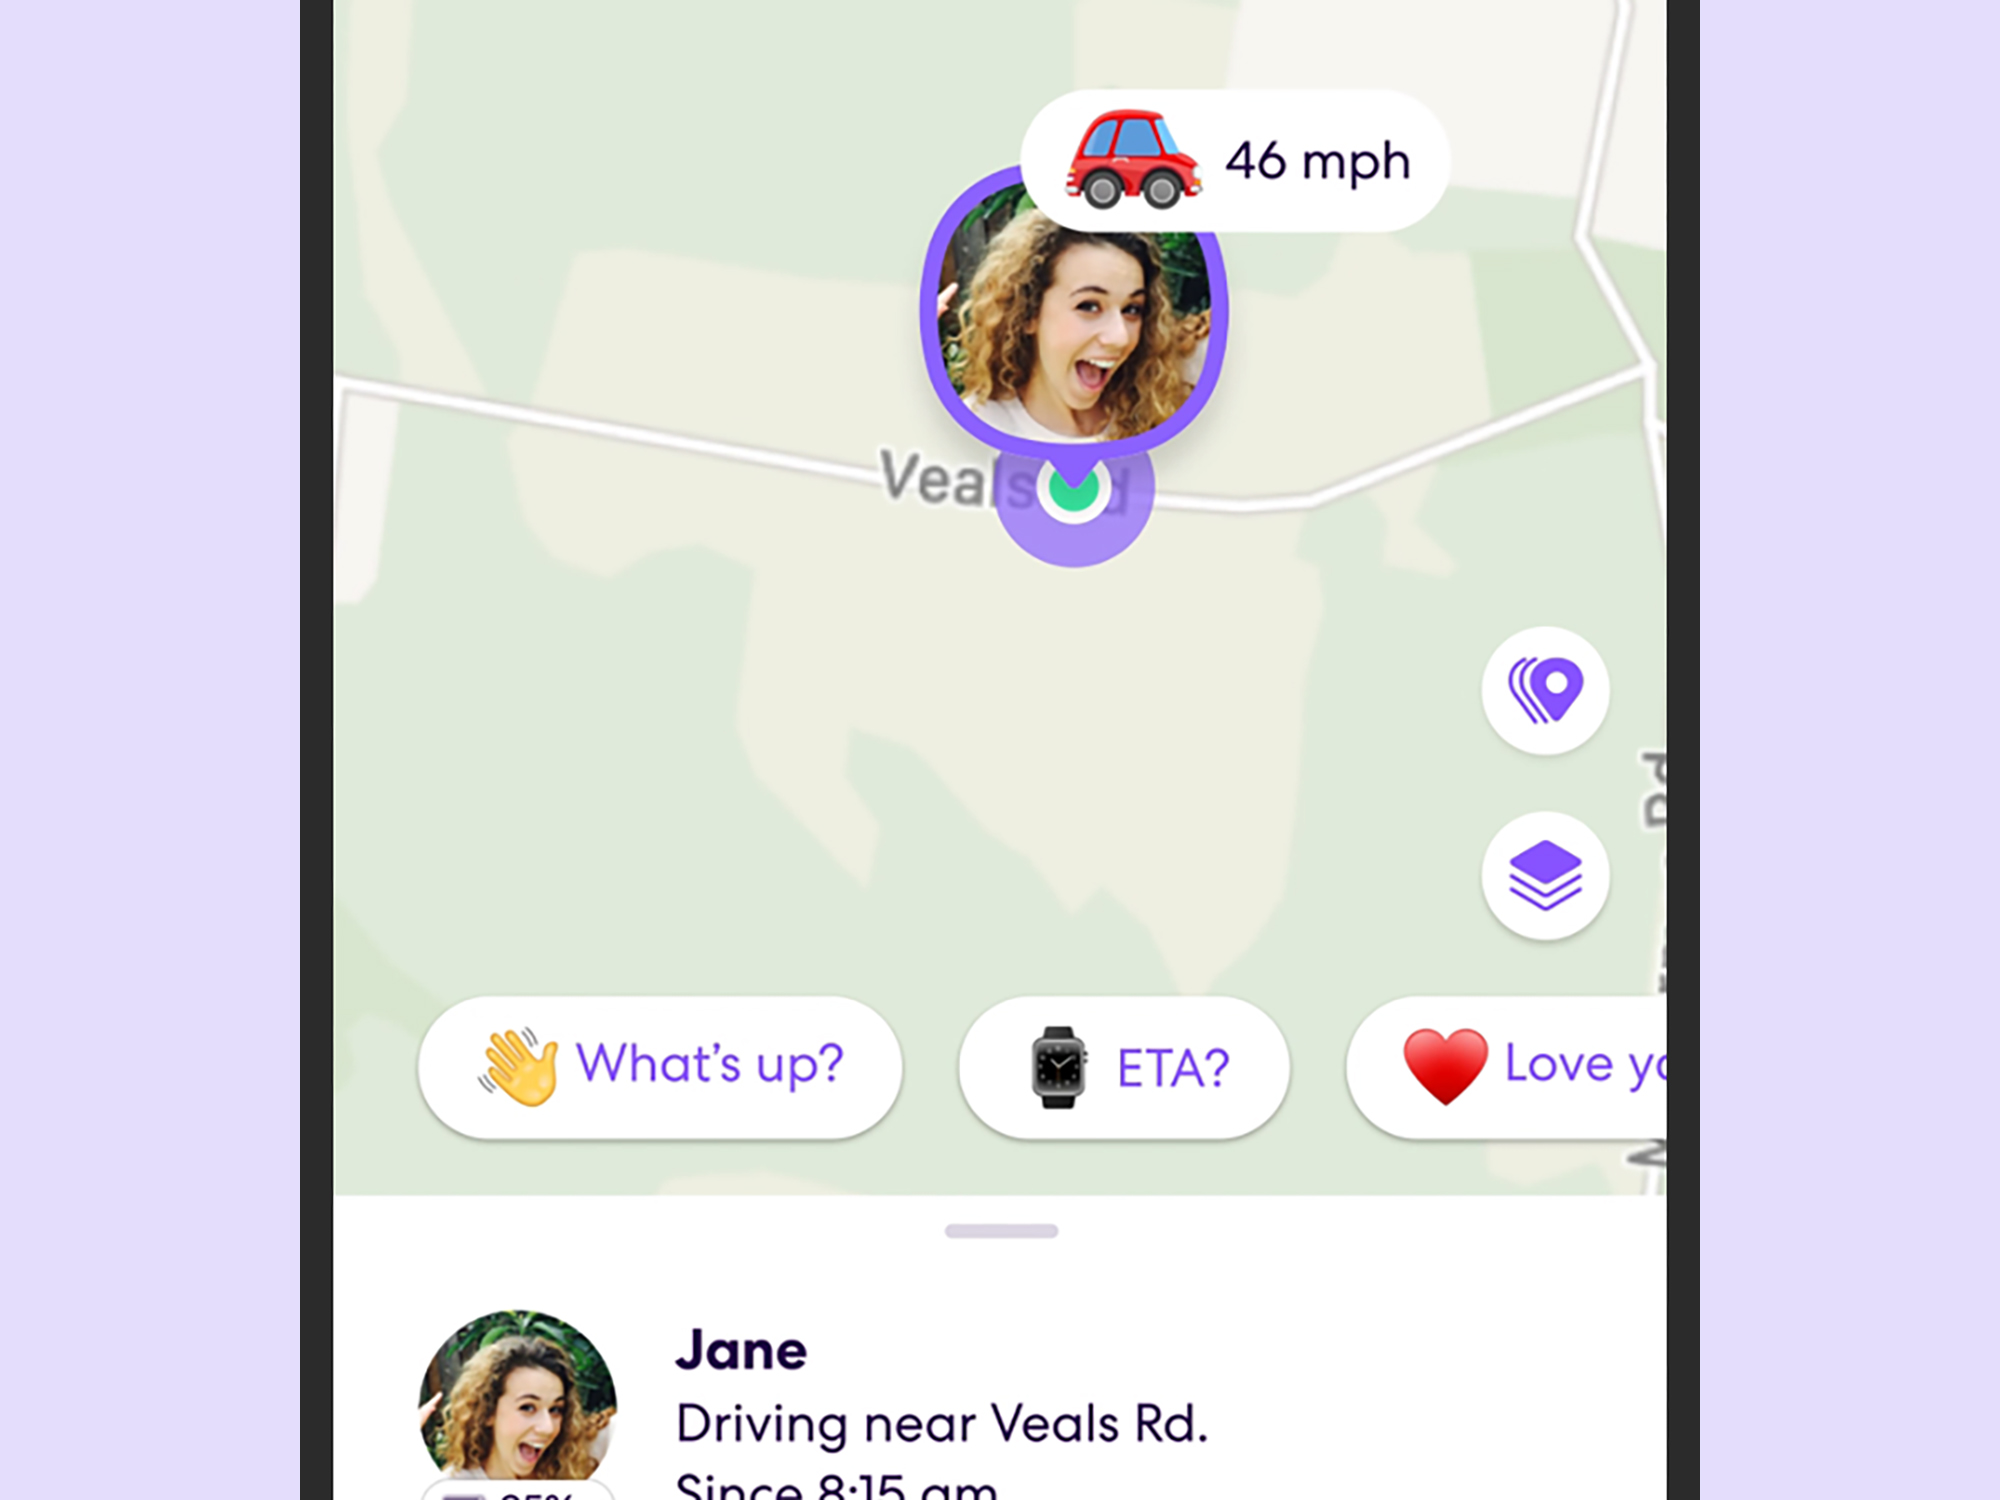 The Life360 app interface, showing a person named Jane driving at 46 miles per hour on a road.